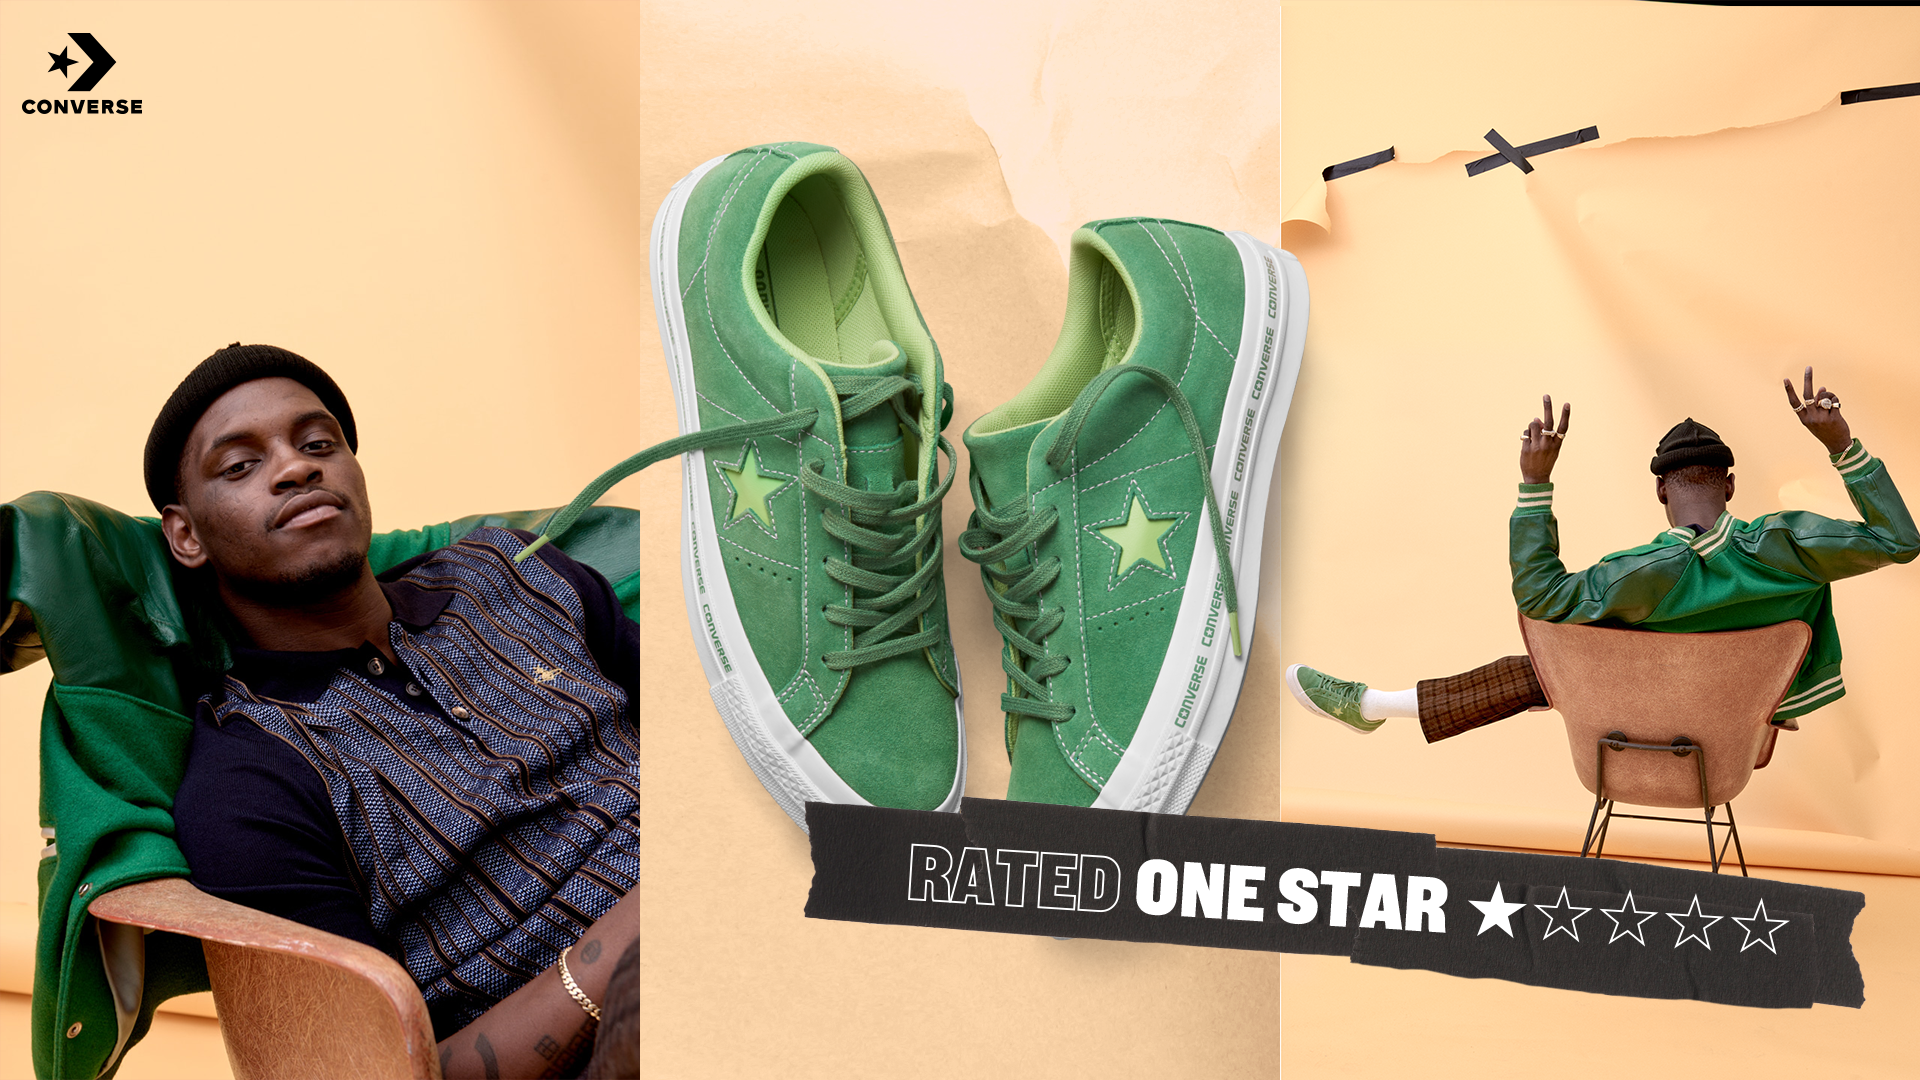 rated one star converse